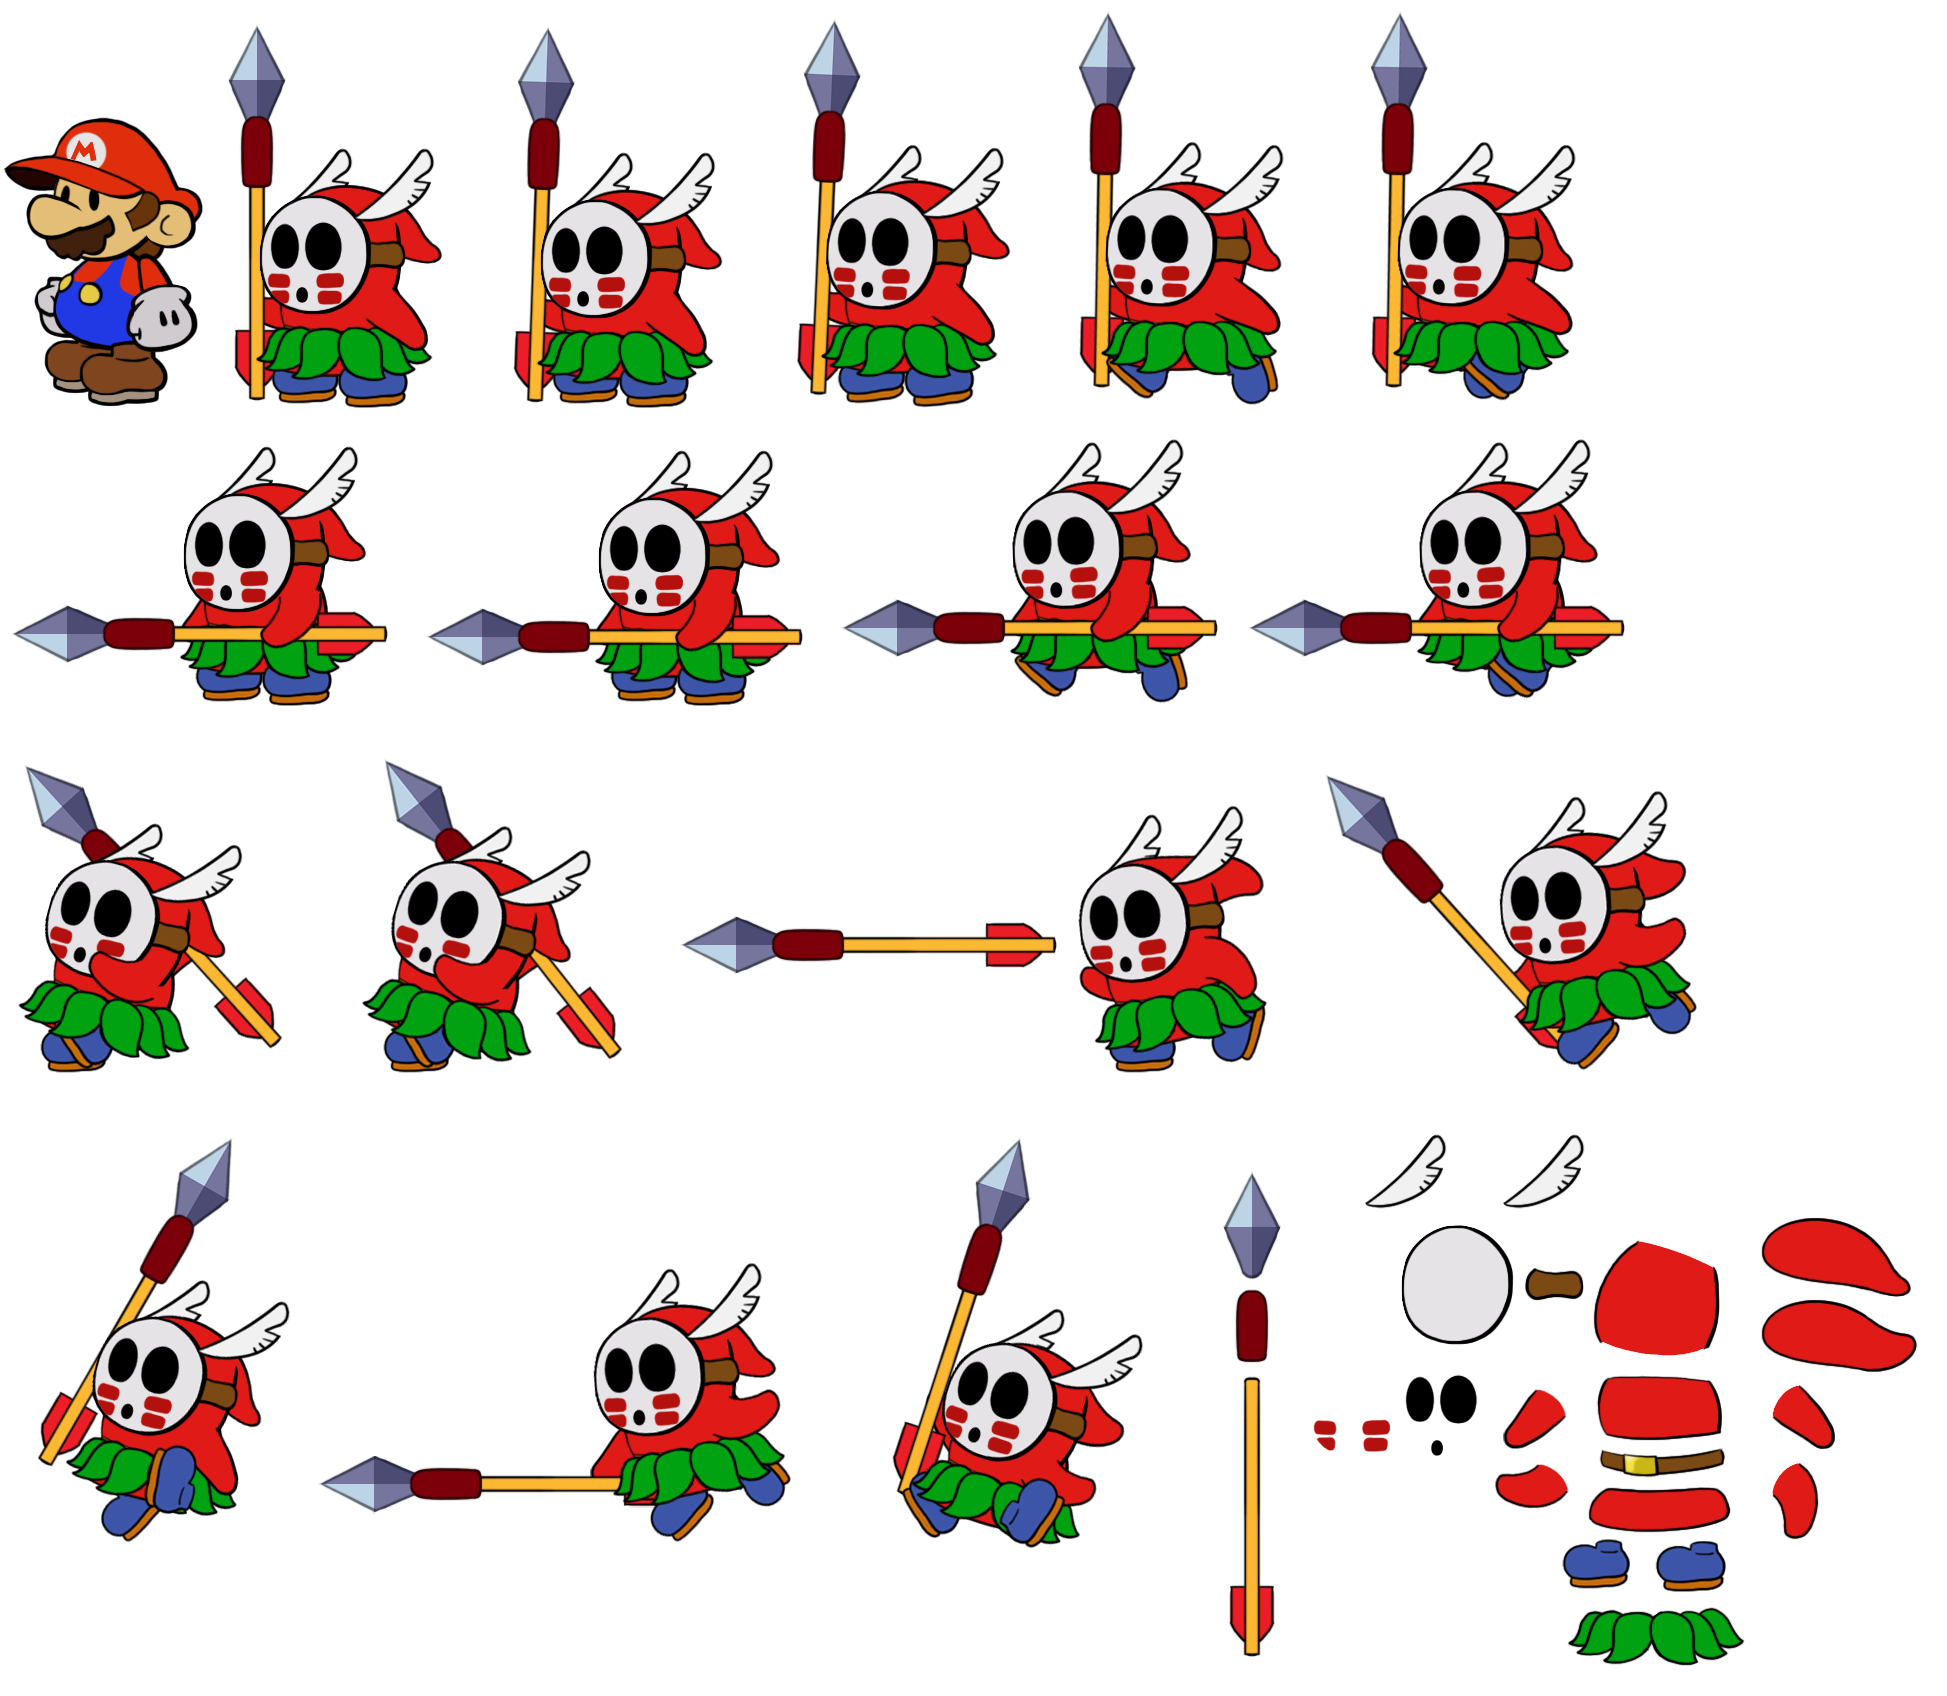 Spear Guy (Paper Mario-Style)